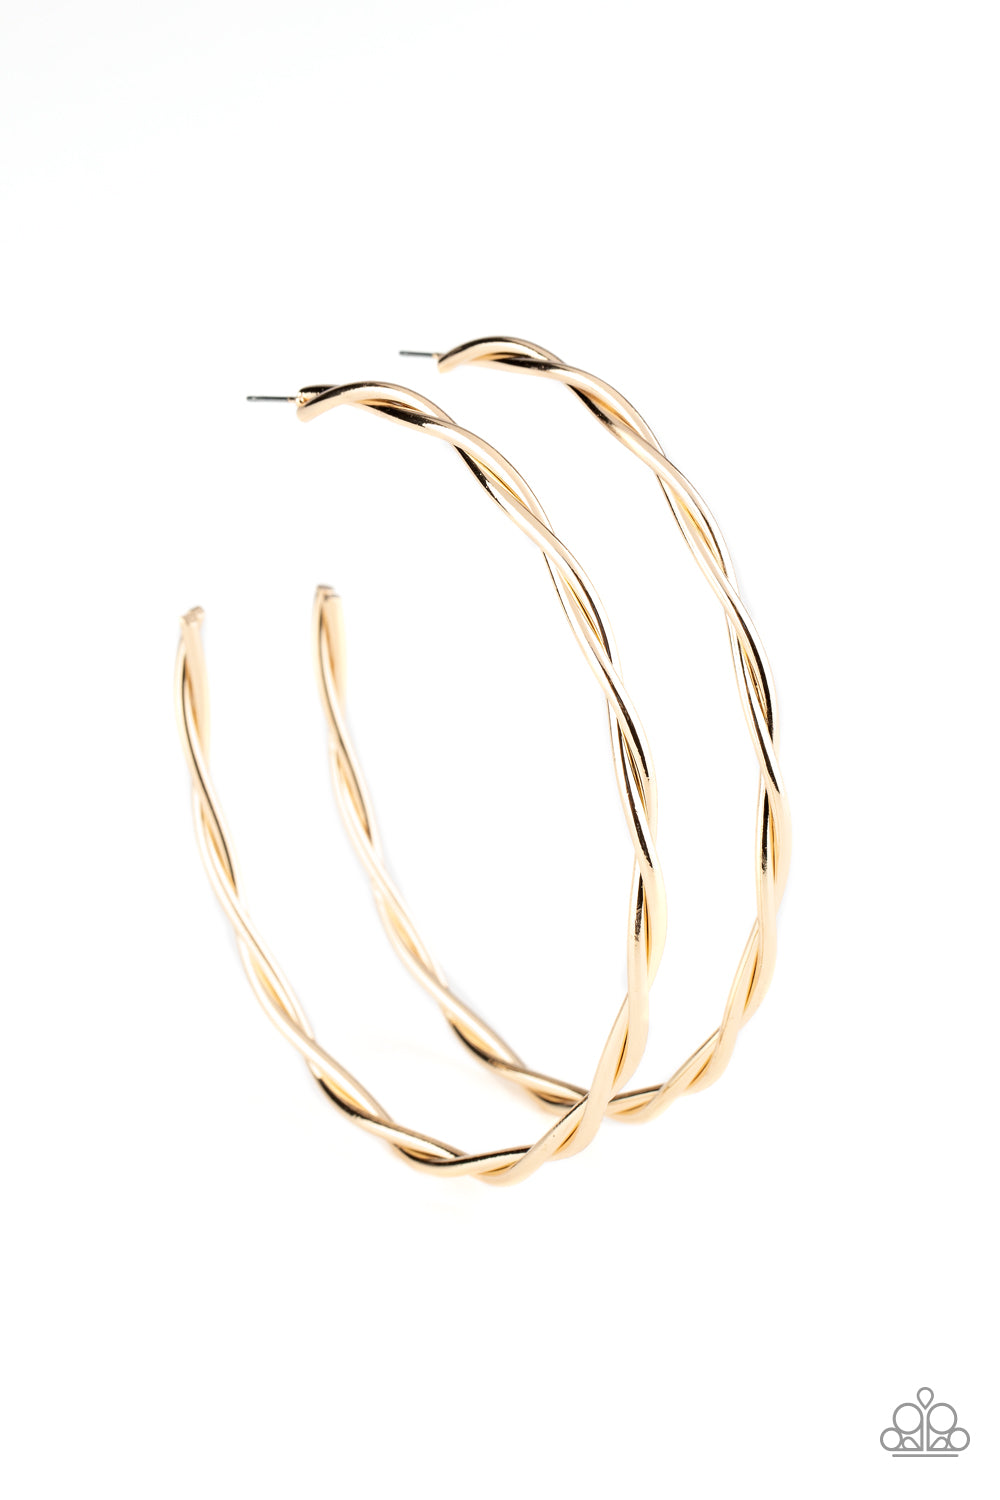 Paparazzi Accessories Out of Control Curves - Gold Hoop Earrings - Lady T Accessories